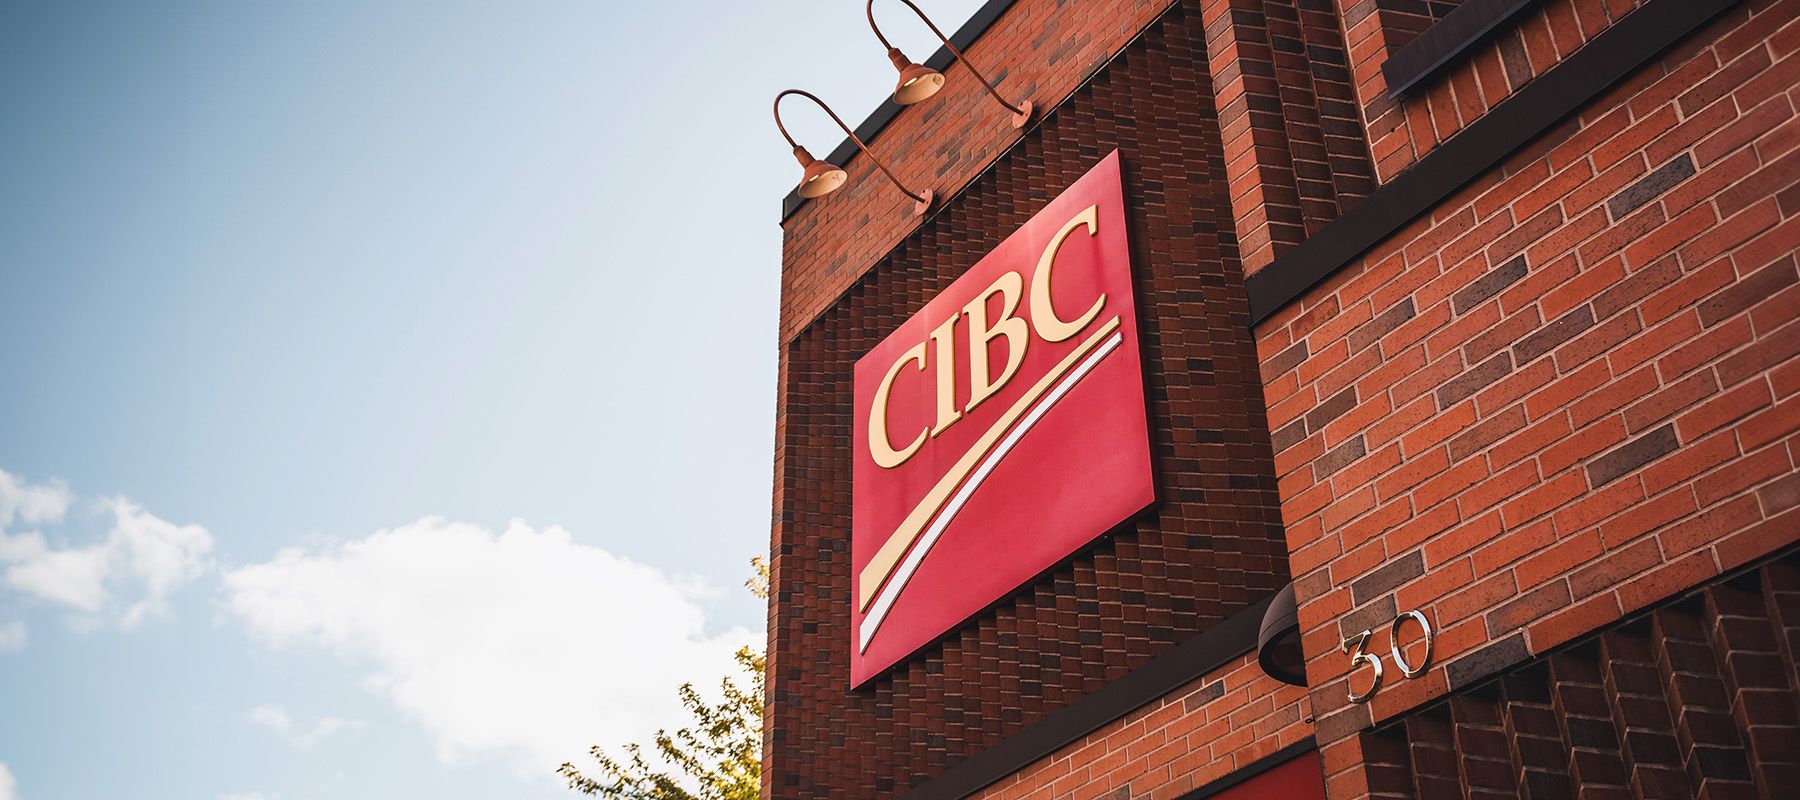 low shot of CIBC bank and its signage with a blue sky in the background